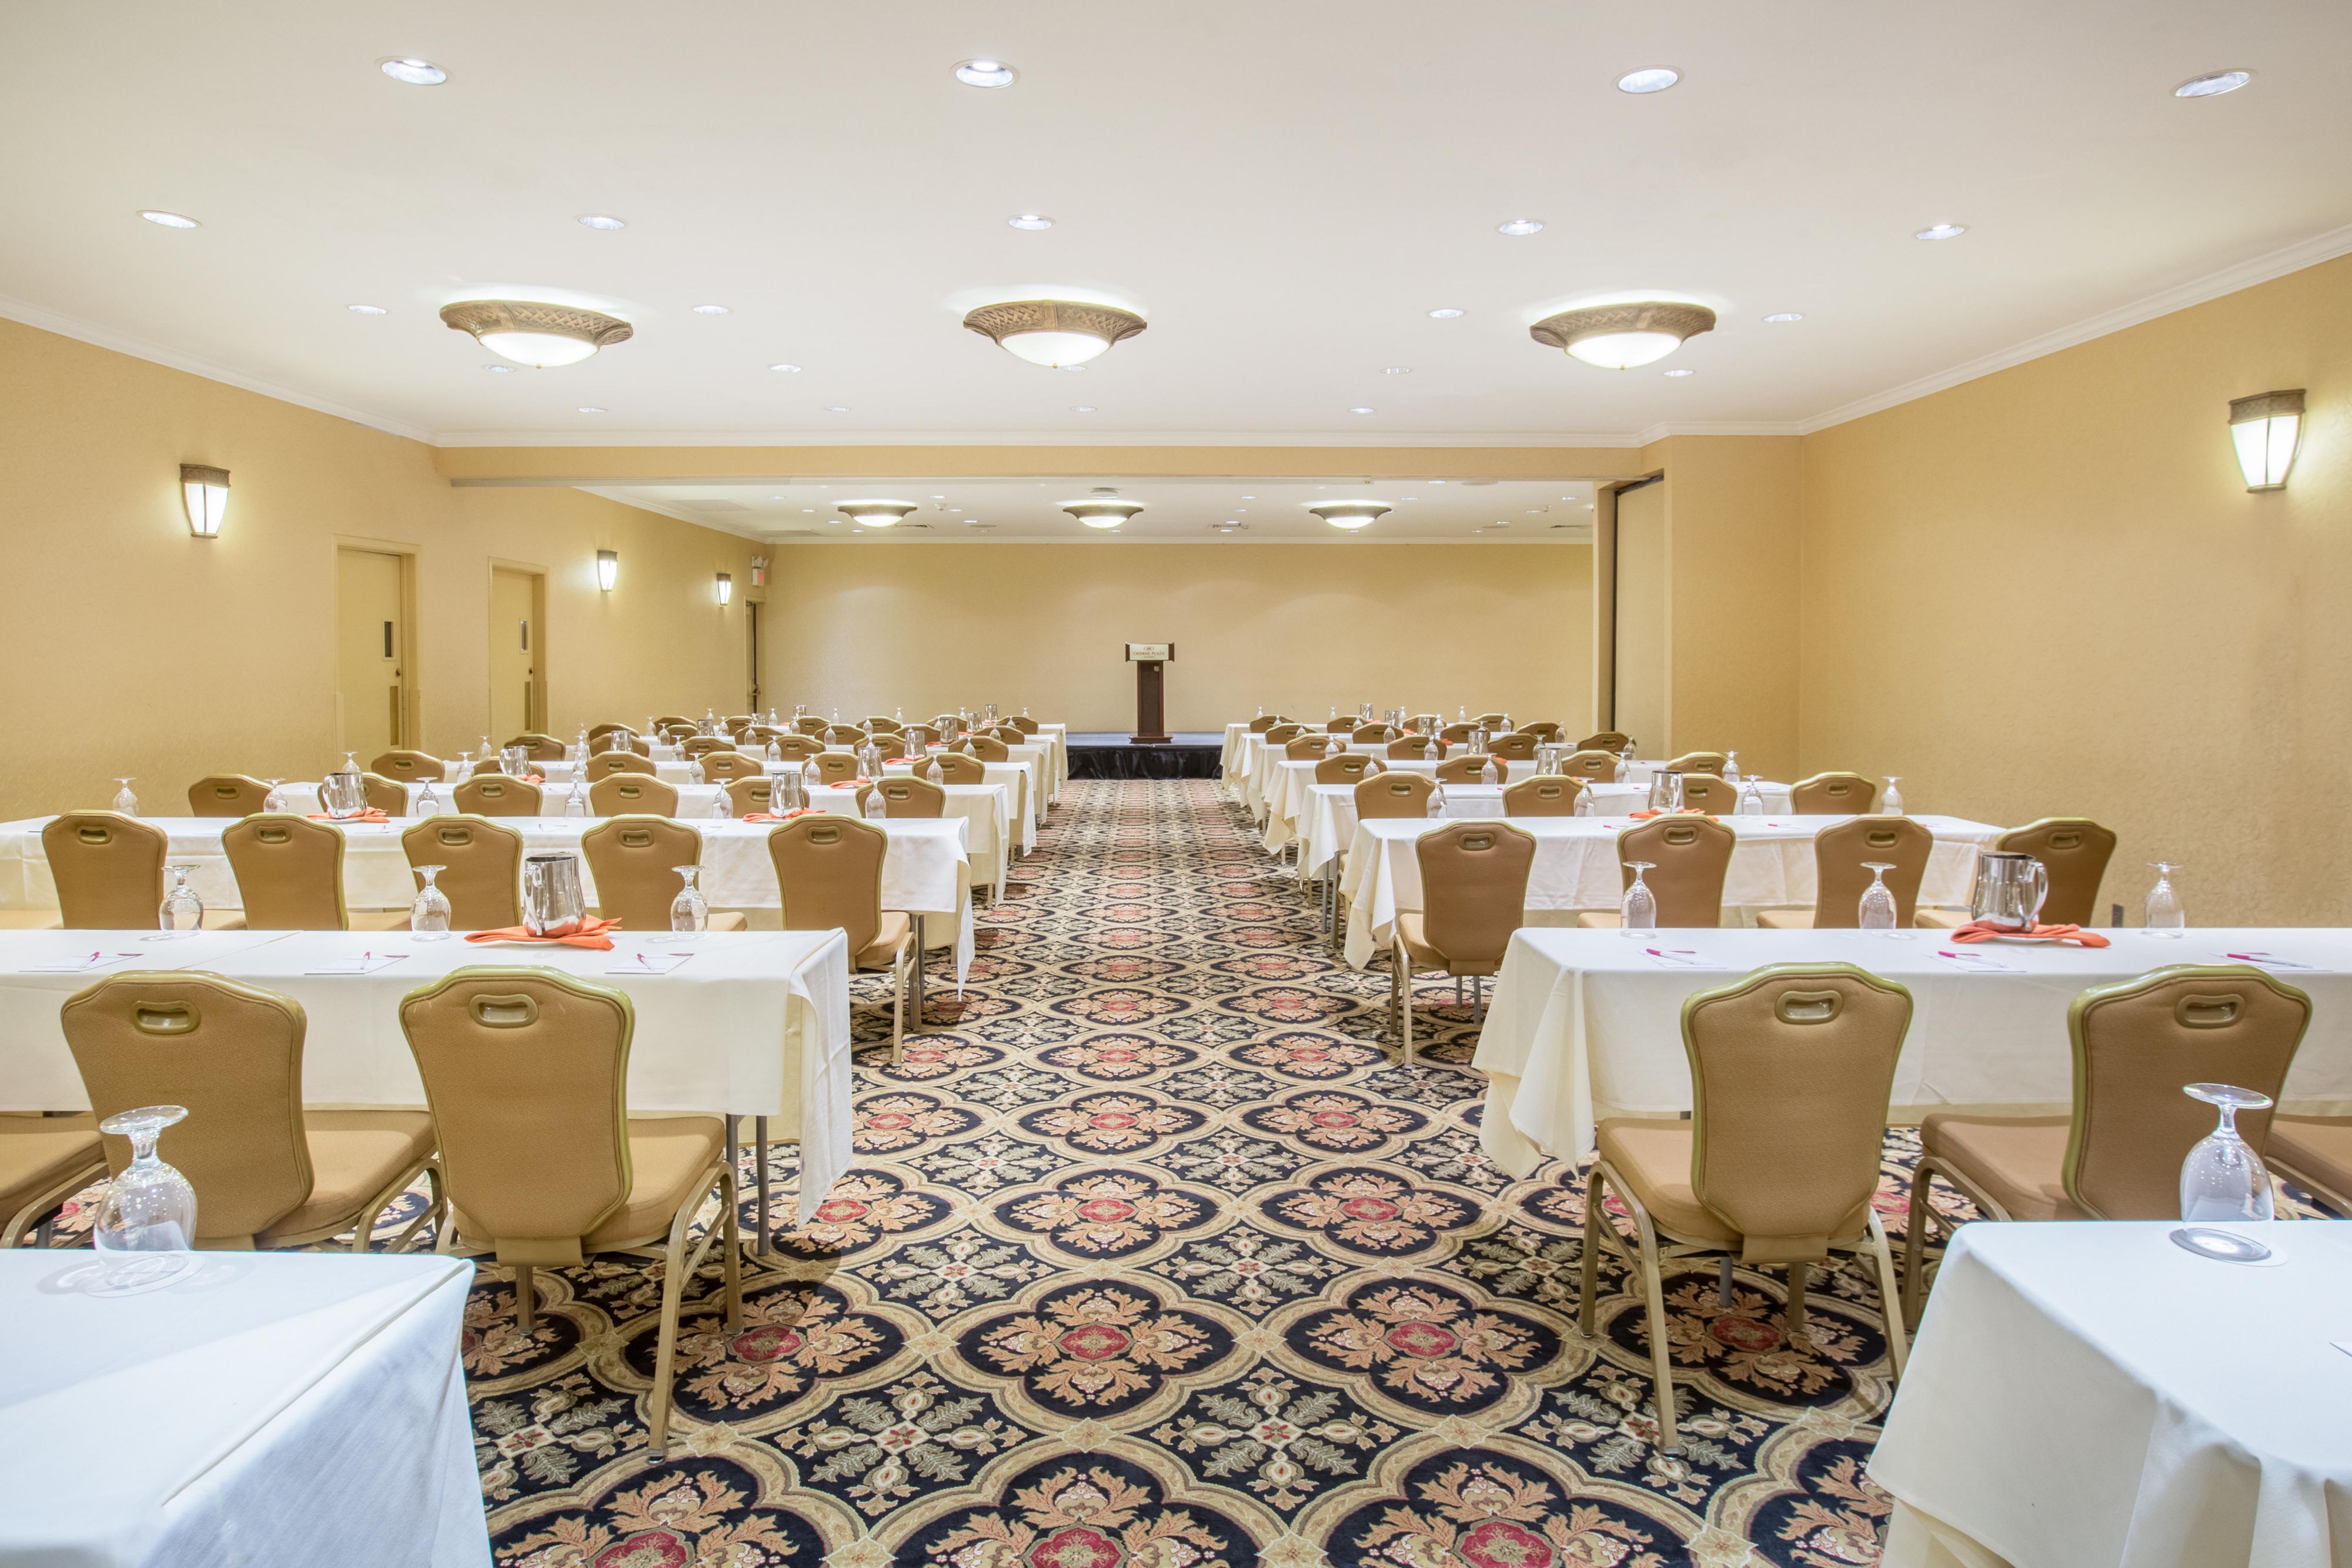 30,000 Sq. Ft. of meeting space makes us perfect for all functions